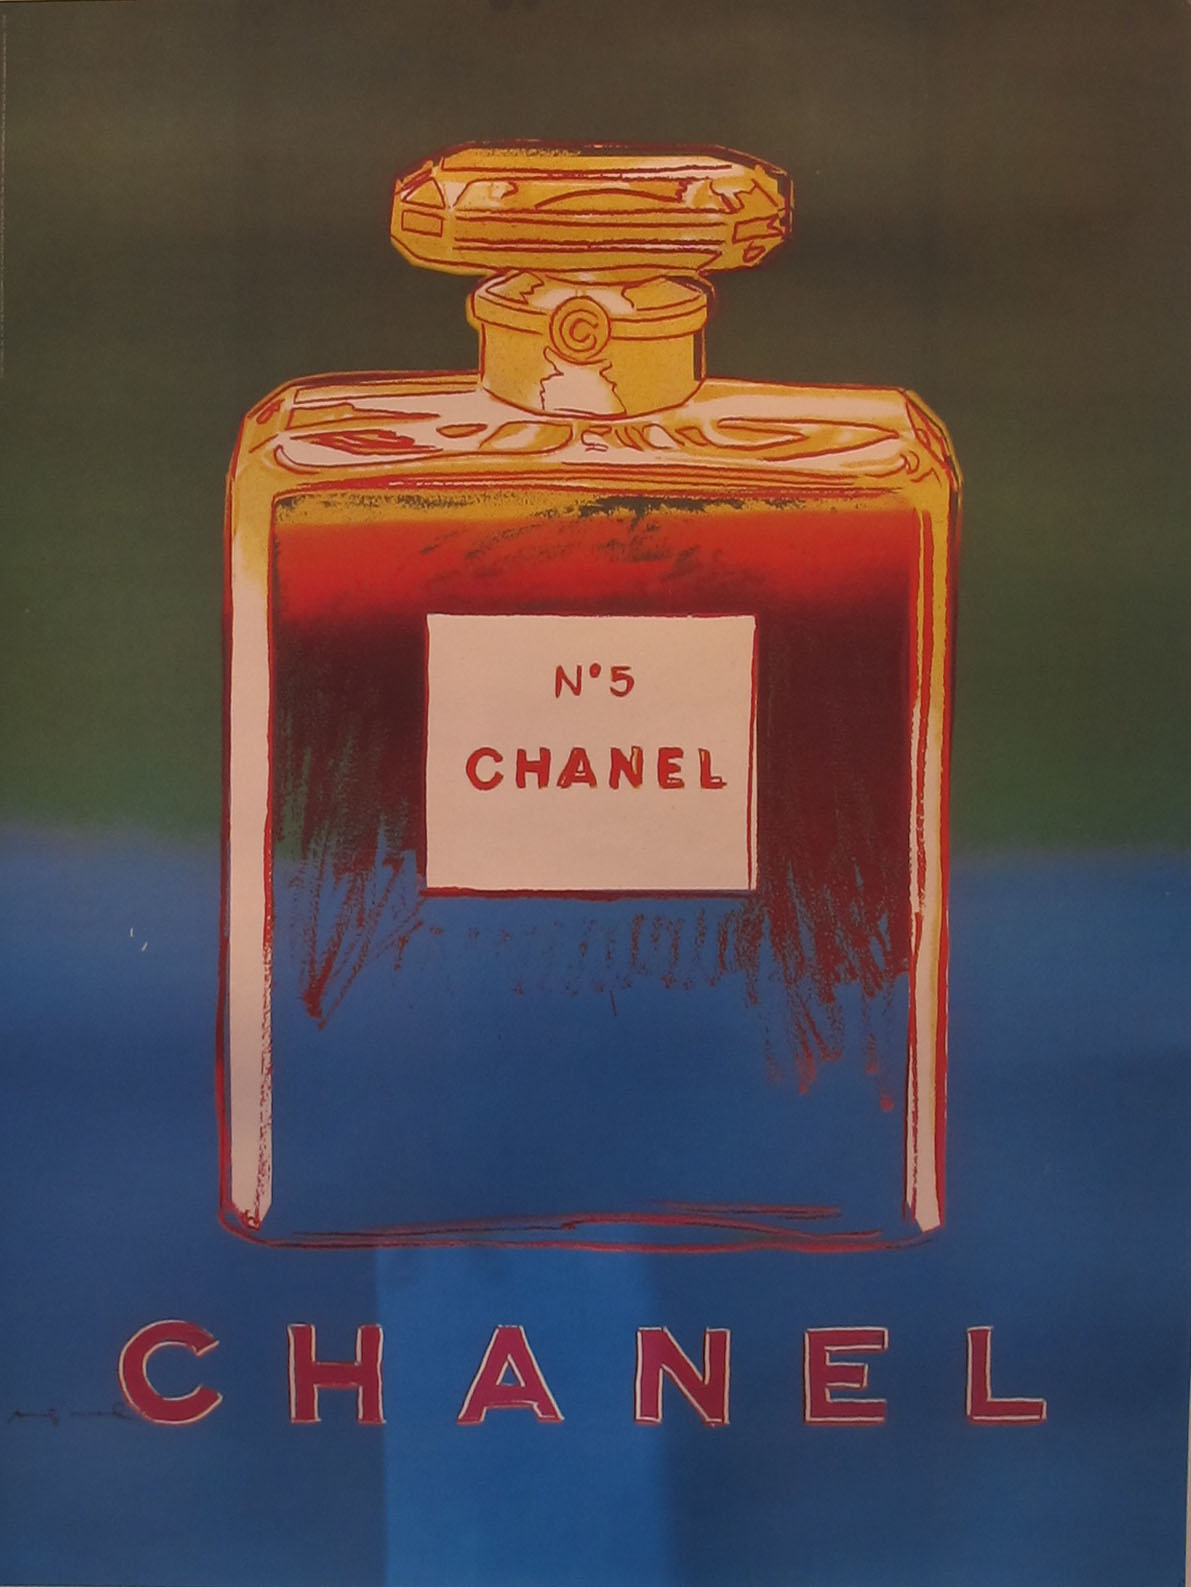 Andy Warhol Chanel No 5 Poster, Reissued by the Andy Warhol Foundation